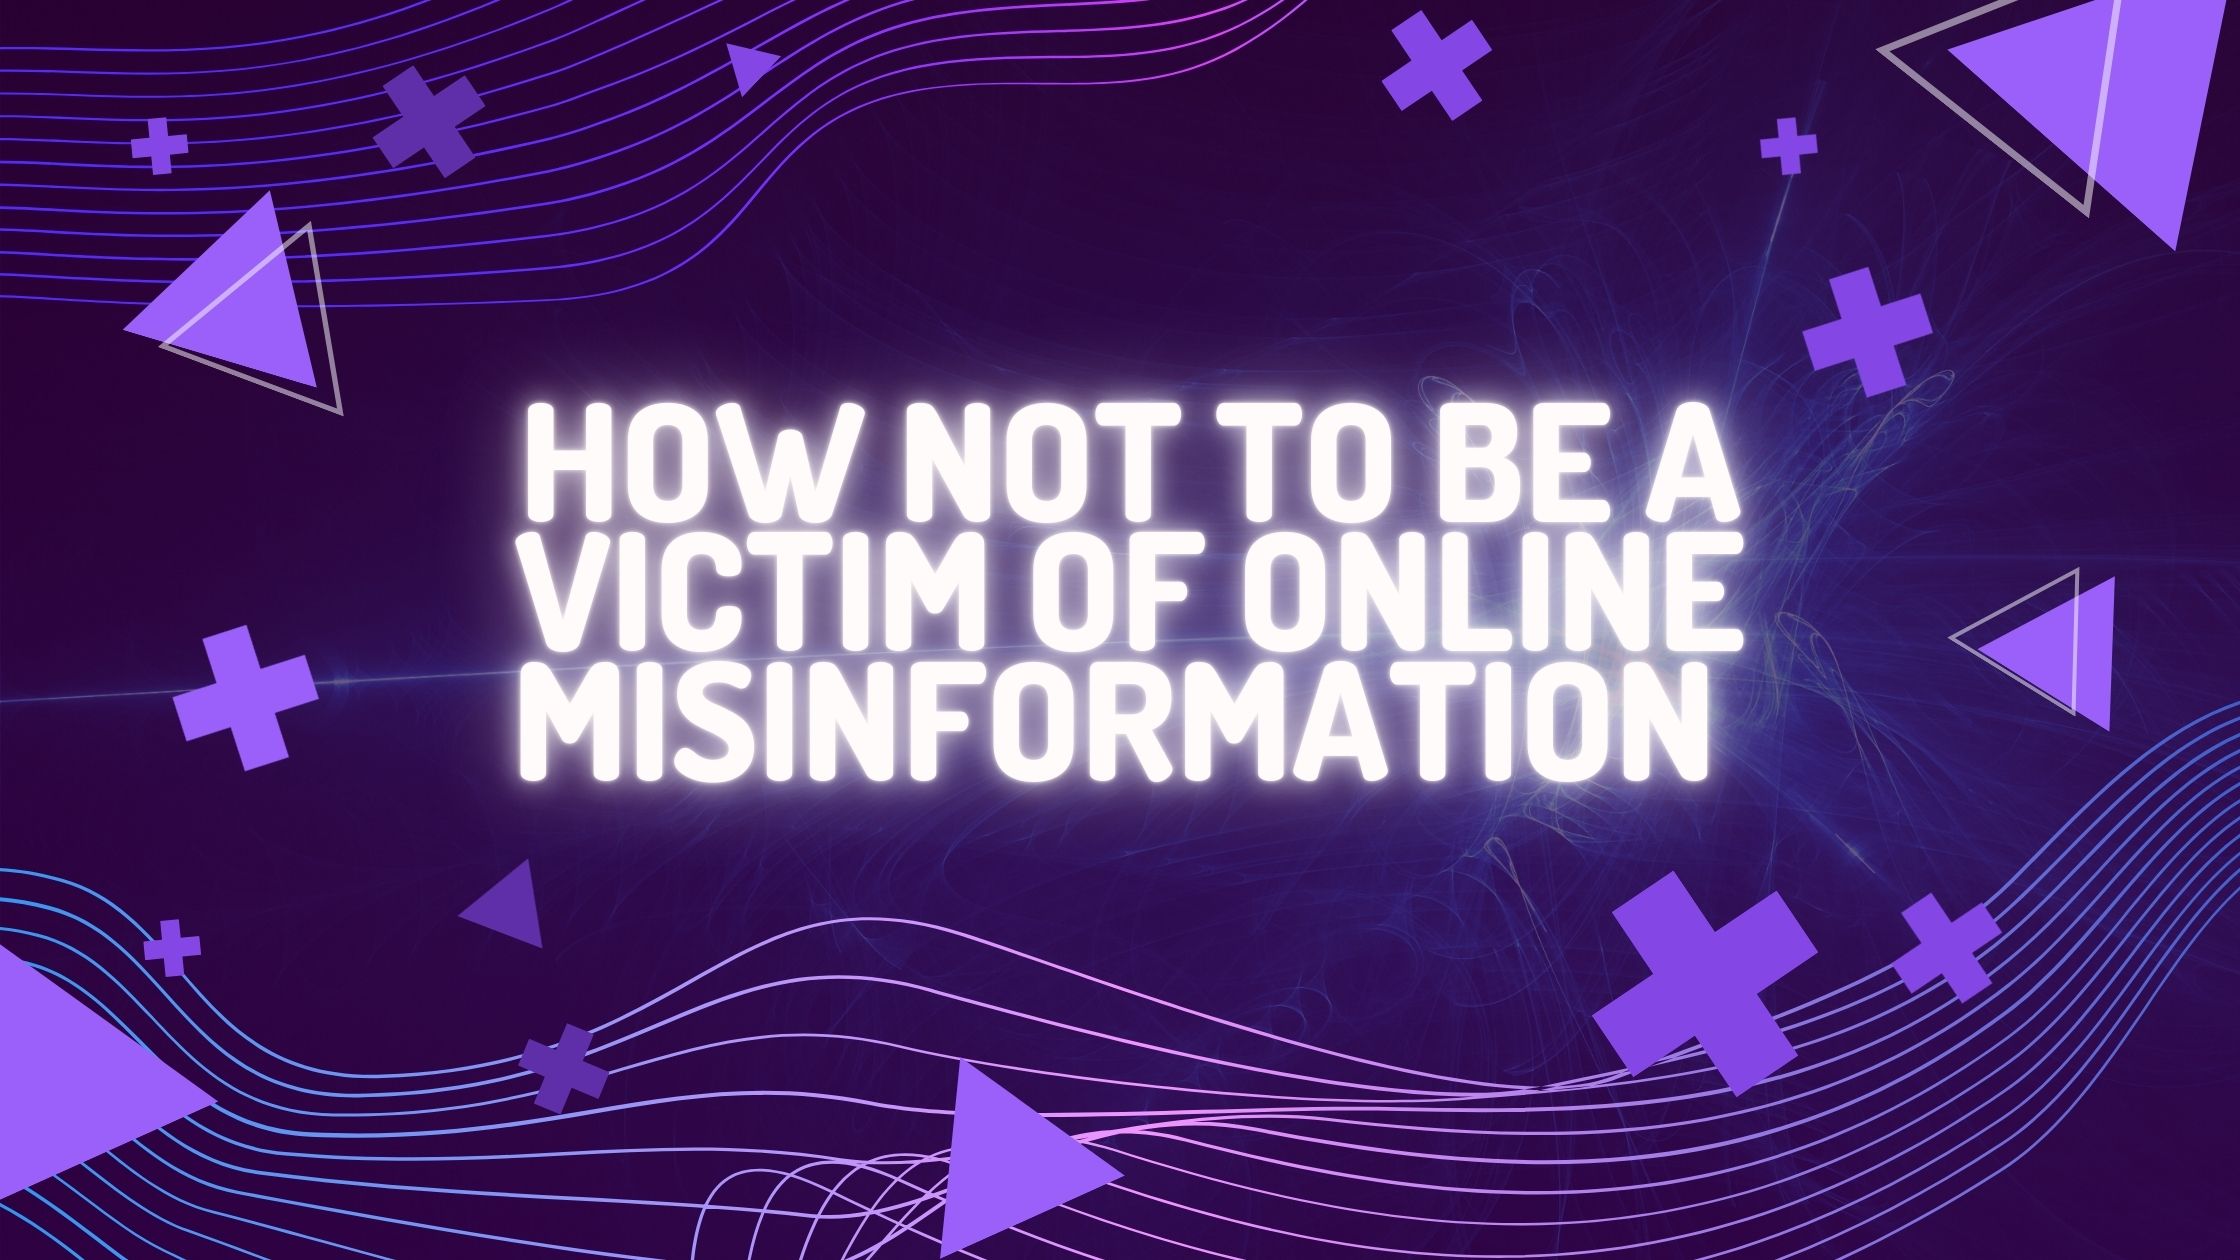 5 ways to not be a victim of online misinformation